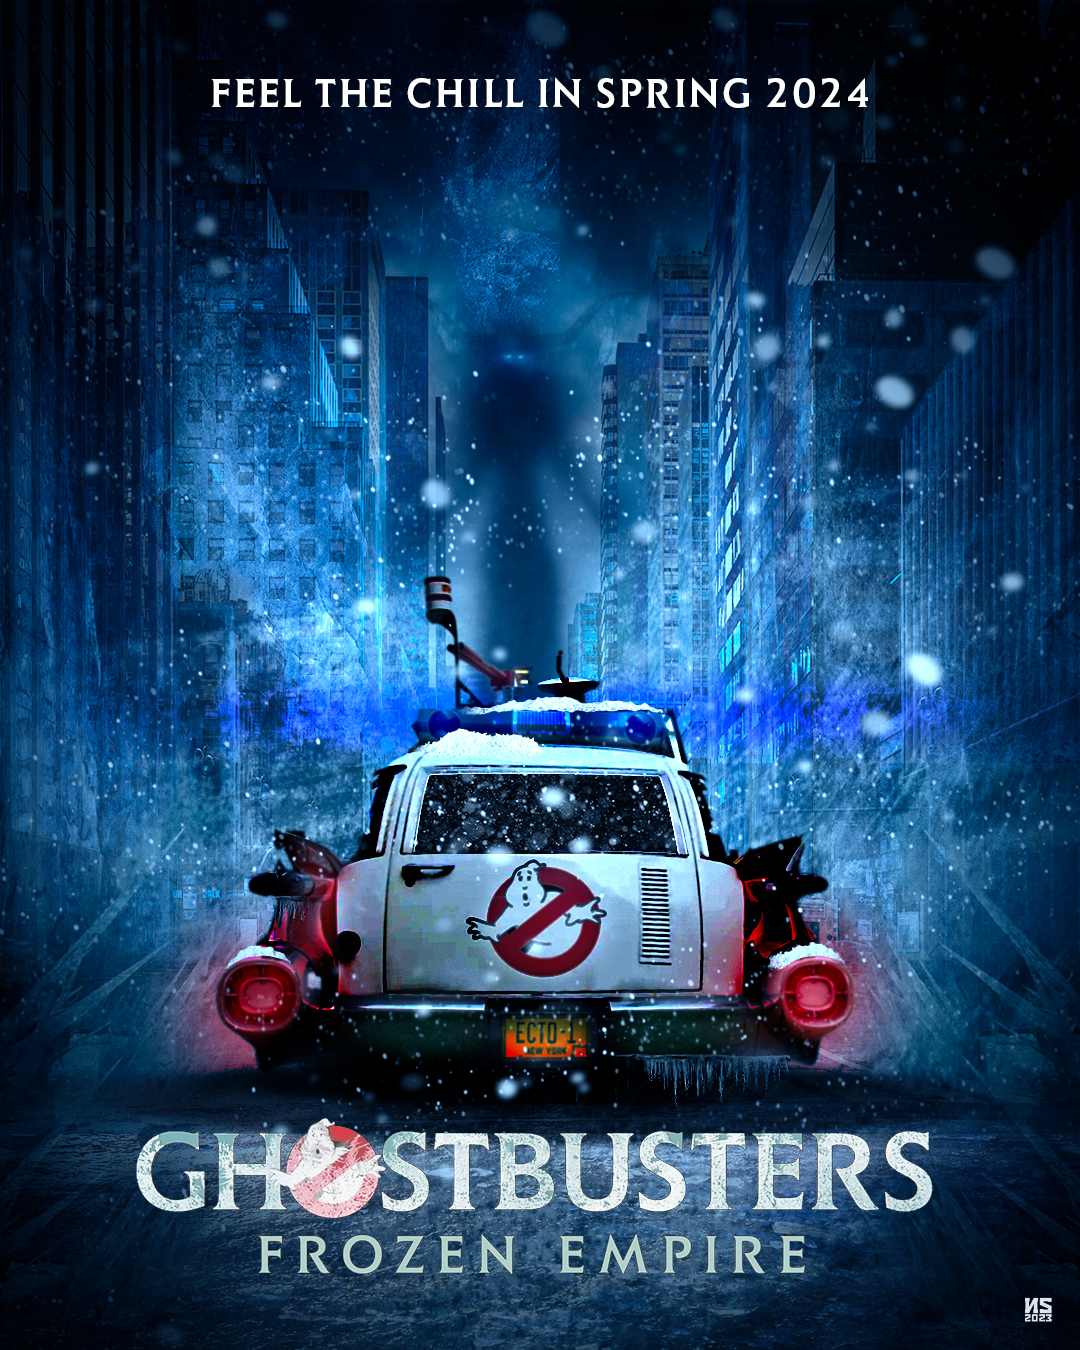 Ghostbusters Frozen Empire Teaser Poster Poster By NSFX Studios